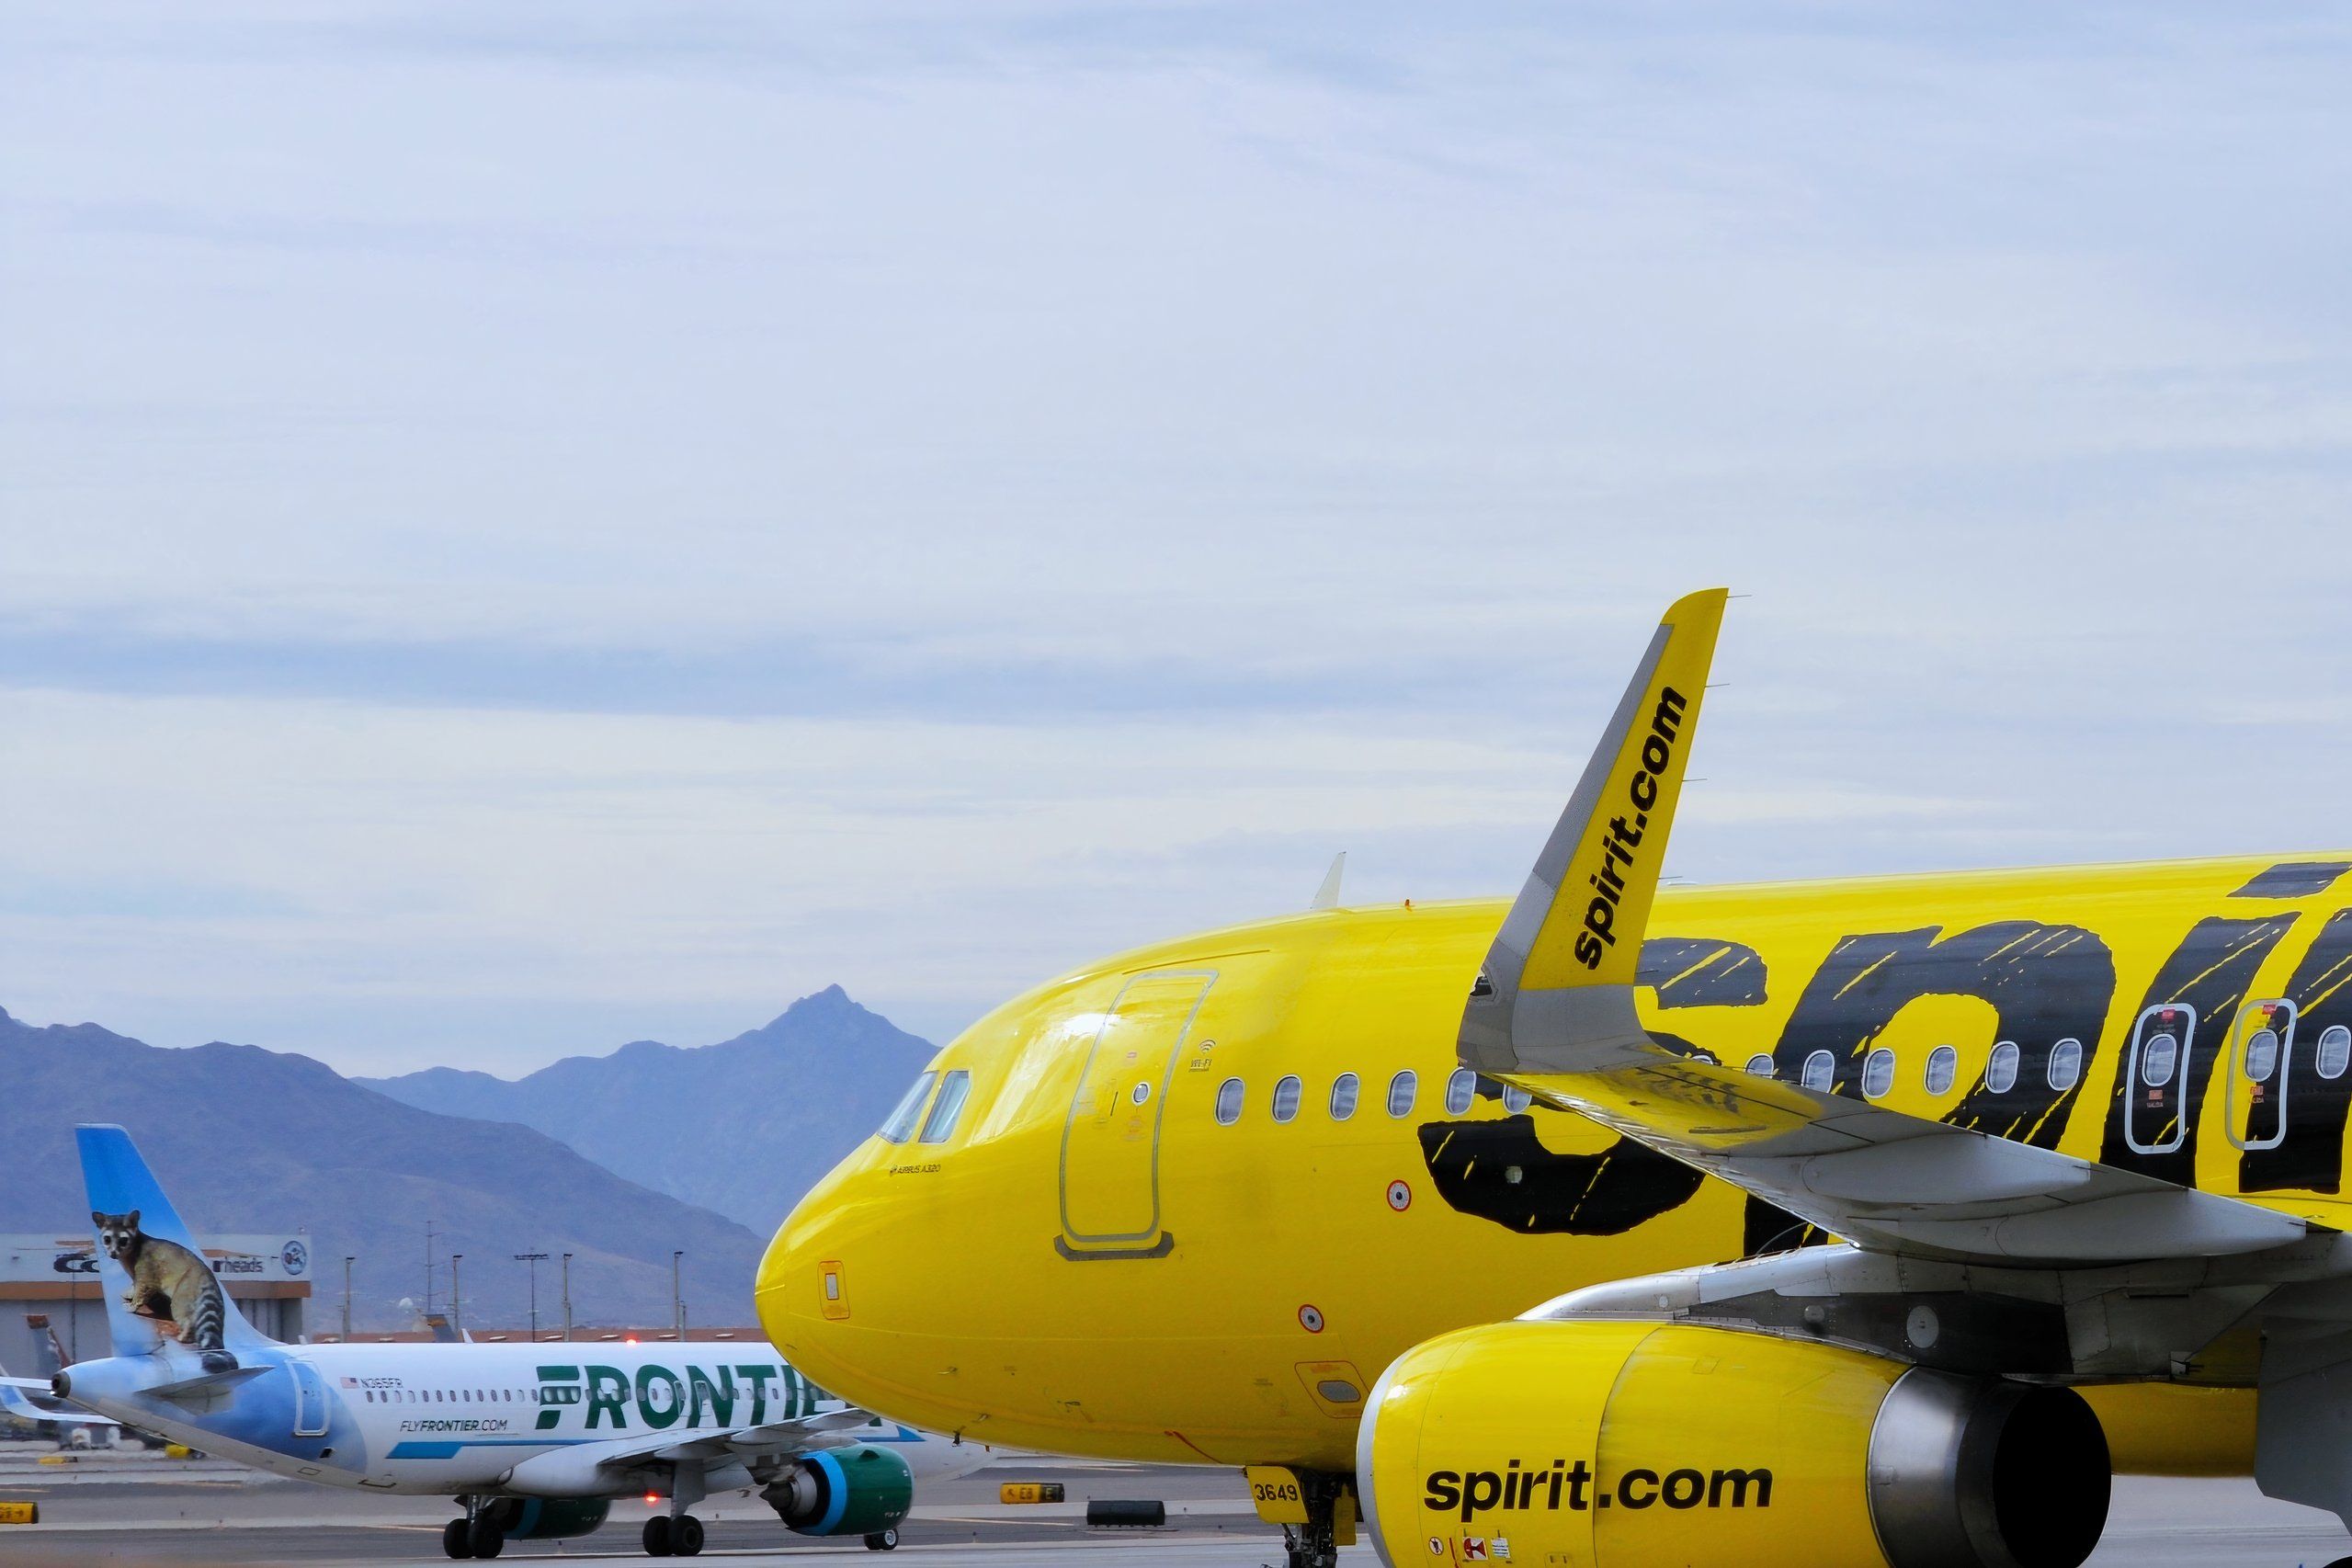 A bright yellow Spirit Airlines Airbus A320 passenger jet departs from Phoenix Sky Harbor International Airport (PHX) with a Frontier Airlines plane in the background